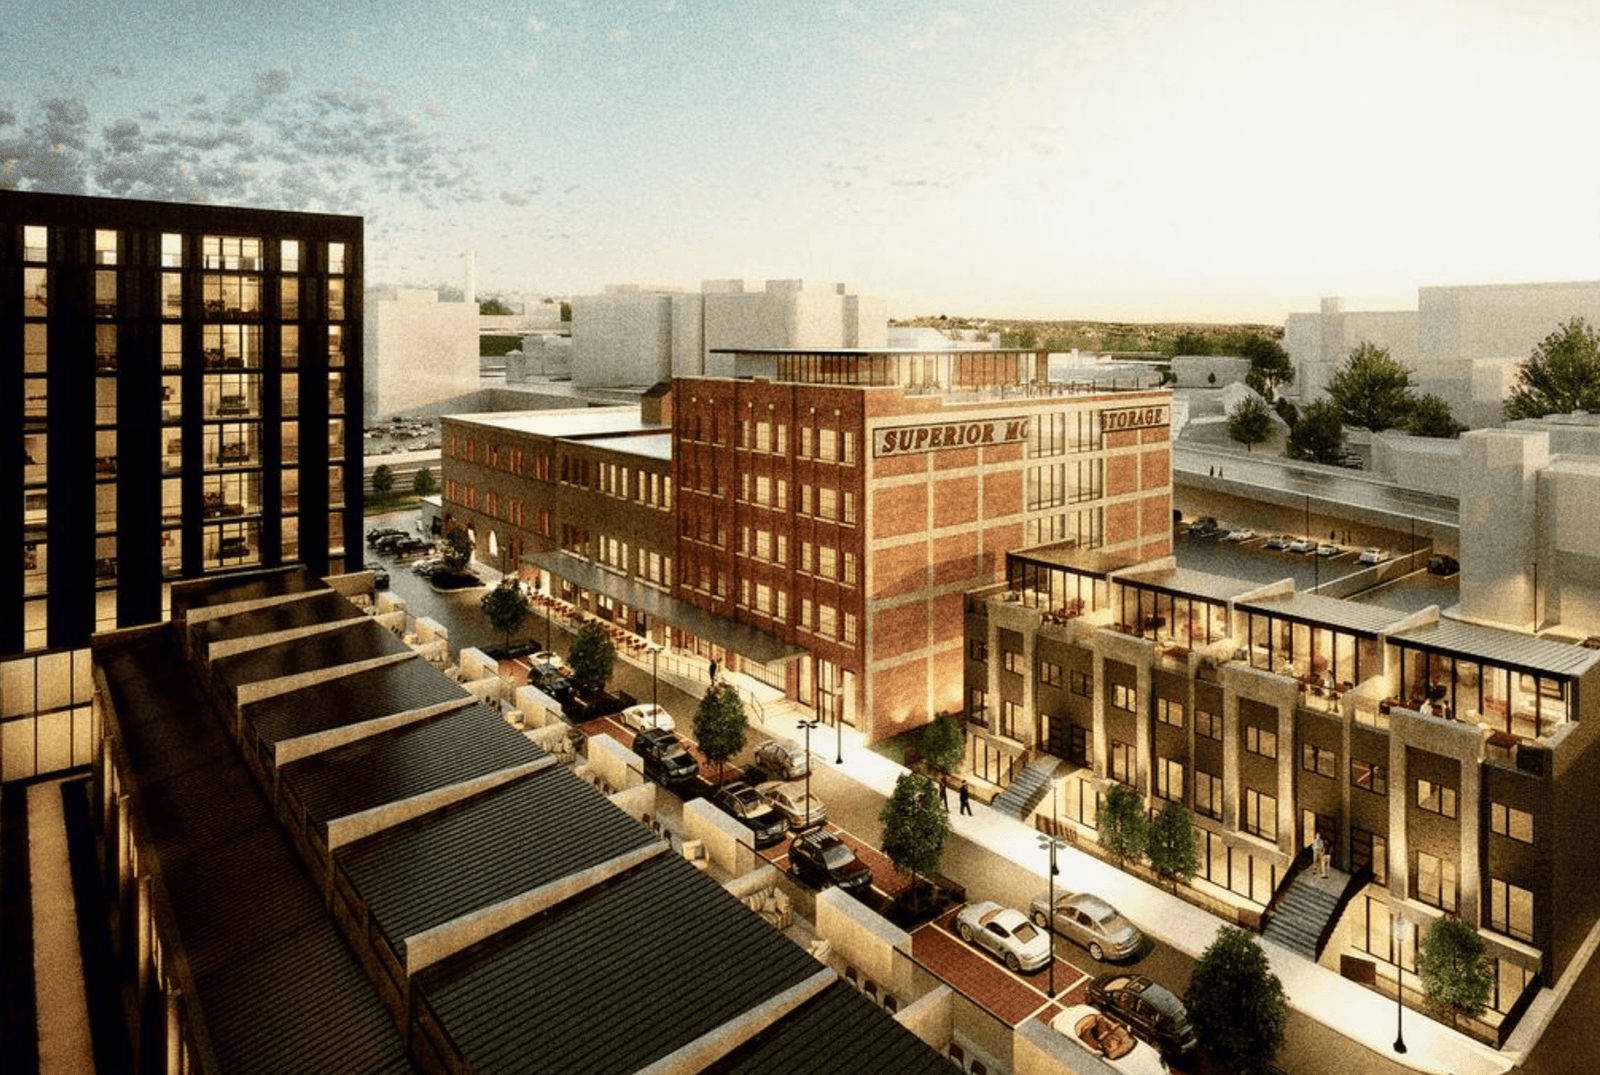 With new deal, St. Louis developer could build 253 apartments in Freight House Village